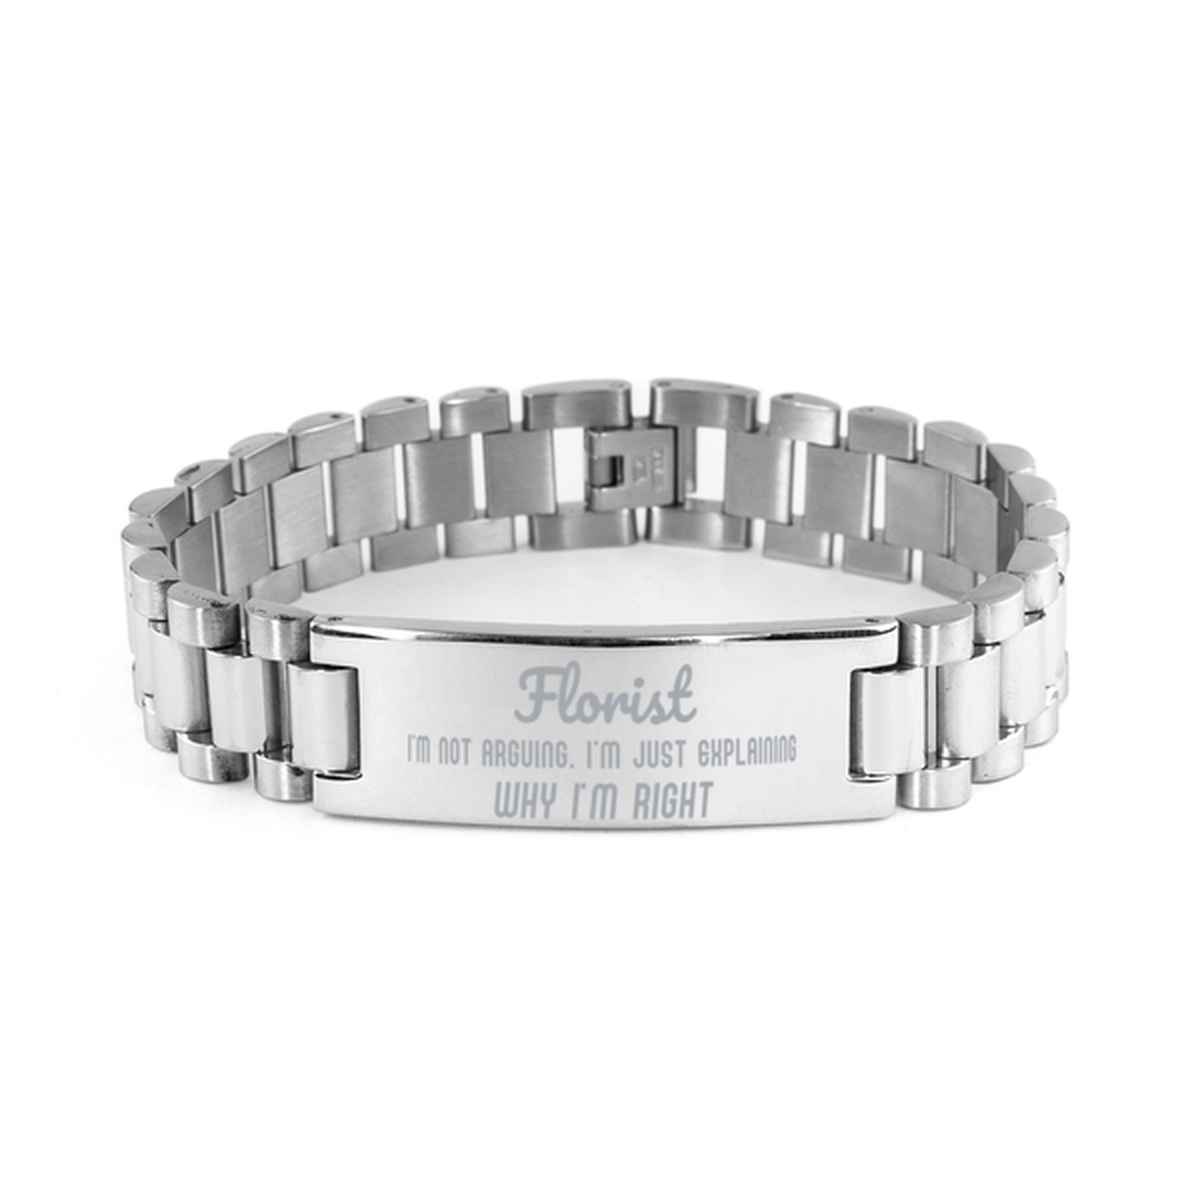 Florist I'm not Arguing. I'm Just Explaining Why I'm RIGHT Ladder Stainless Steel Bracelet, Graduation Birthday Christmas Florist Gifts For Florist Funny Saying Quote Present for Men Women Coworker